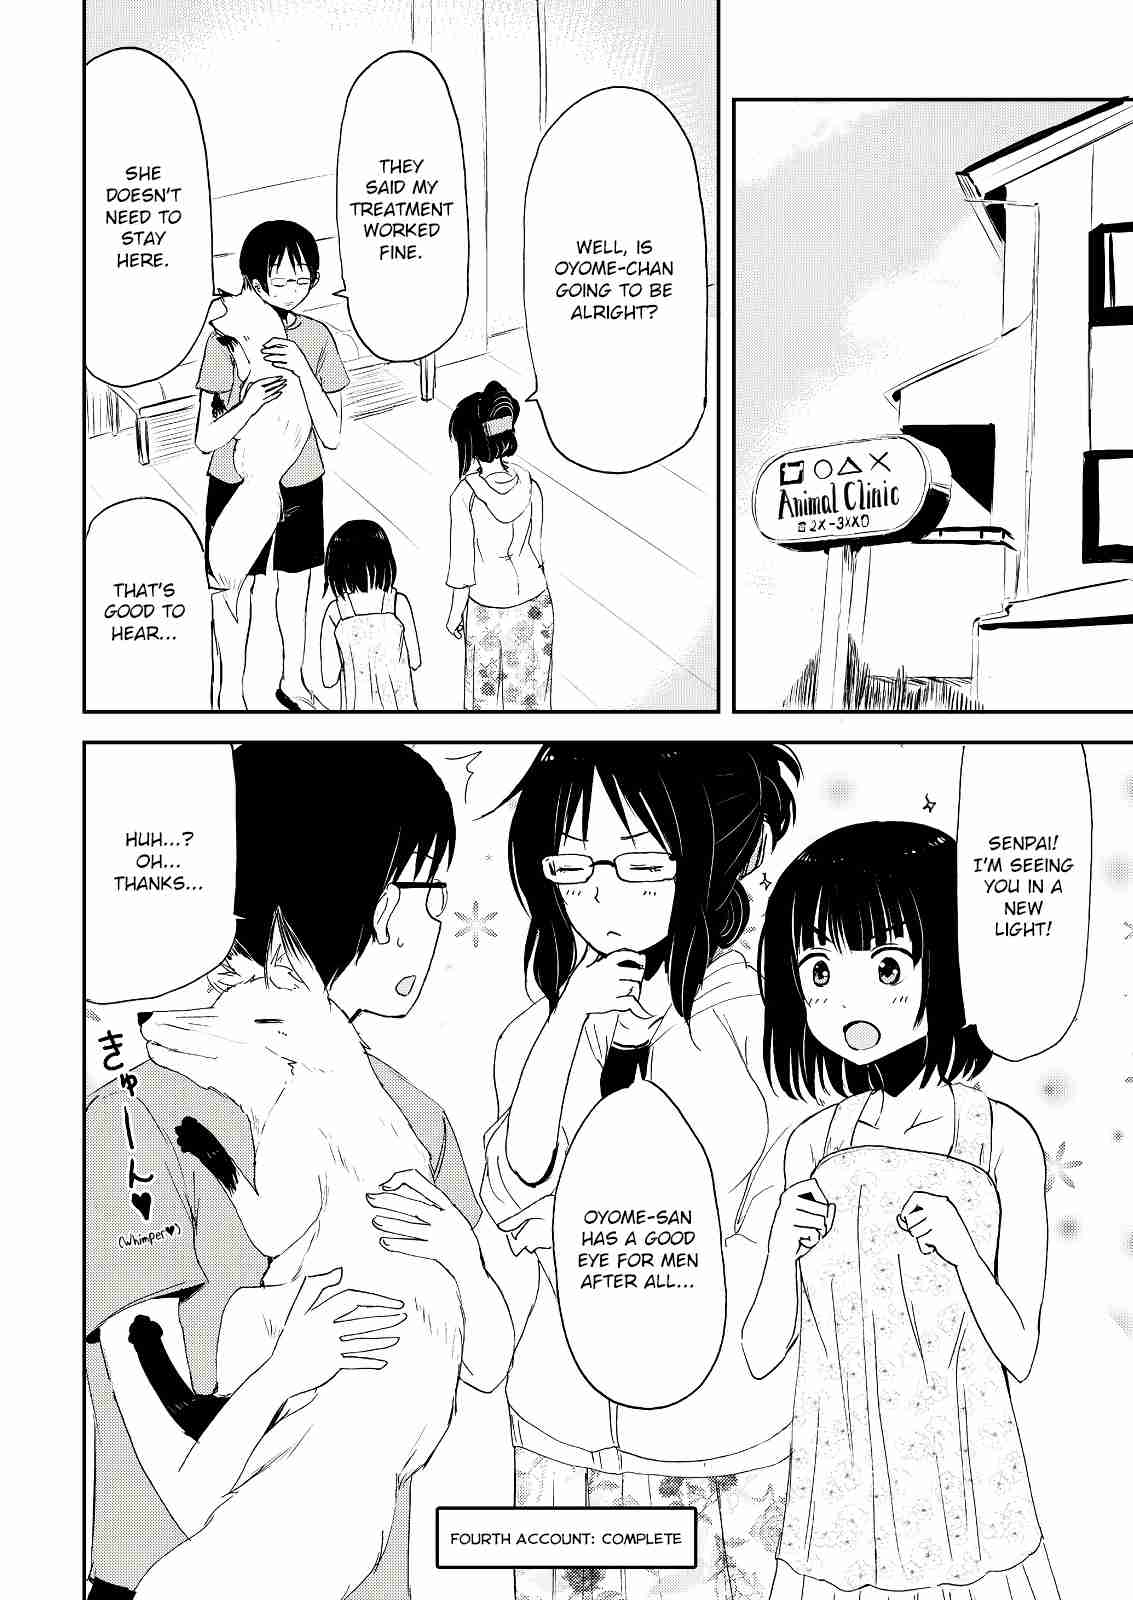 Kitsune no Oyome chan Vol. 1 Ch. 4 When My Kitsune Wife and I Went for a Swim in the Ocean